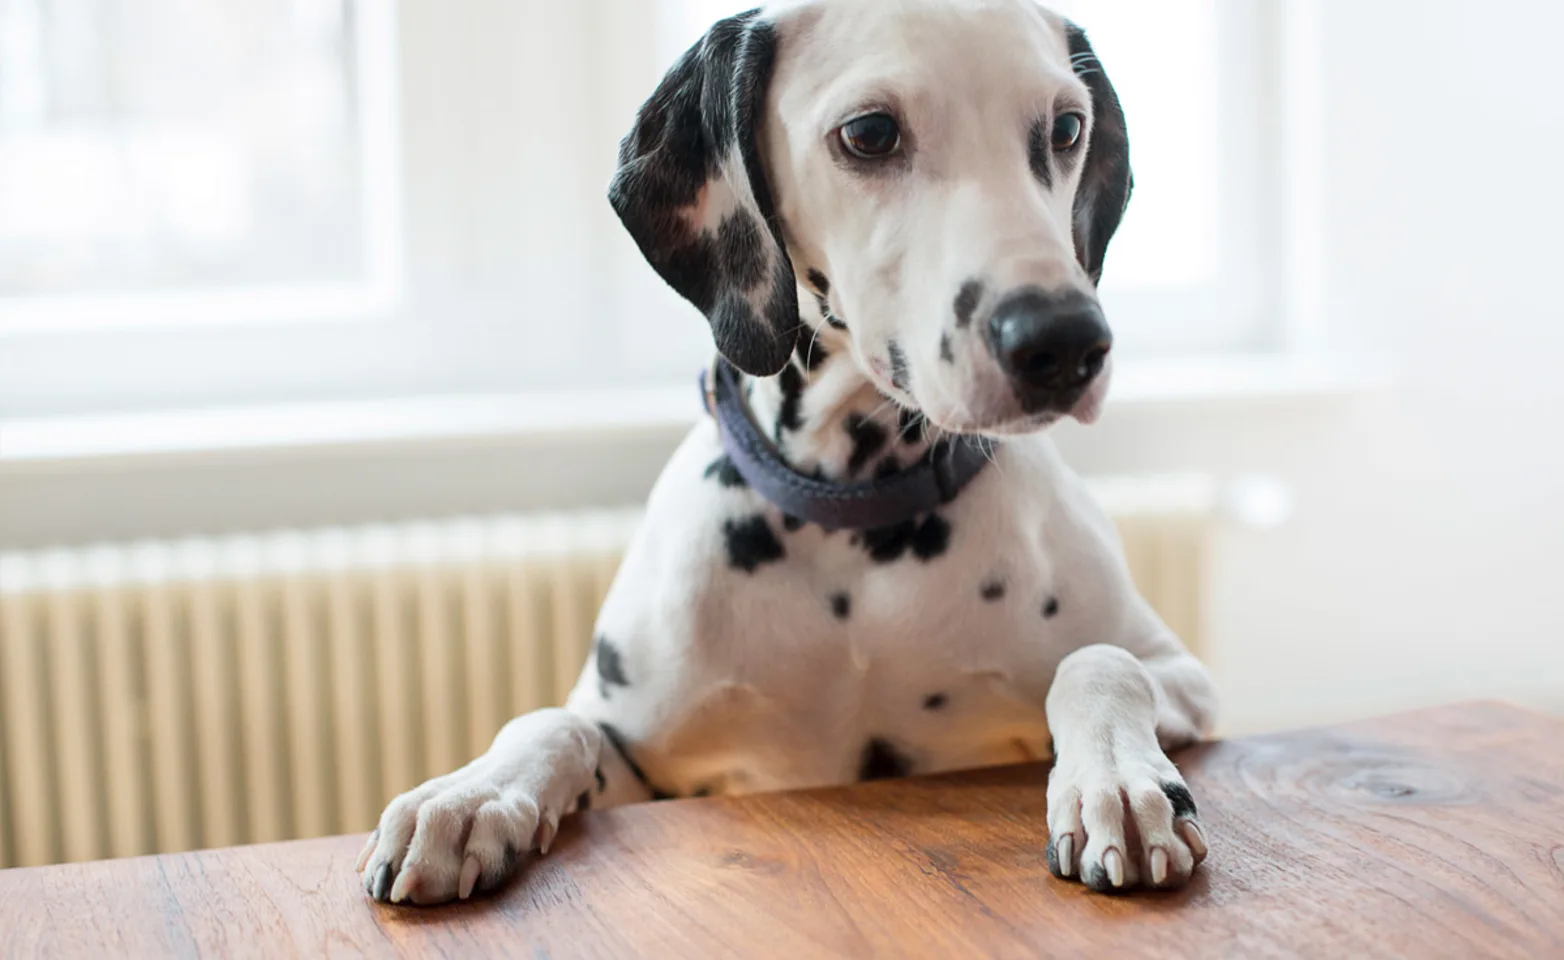 Dalmatian with paws on top of table